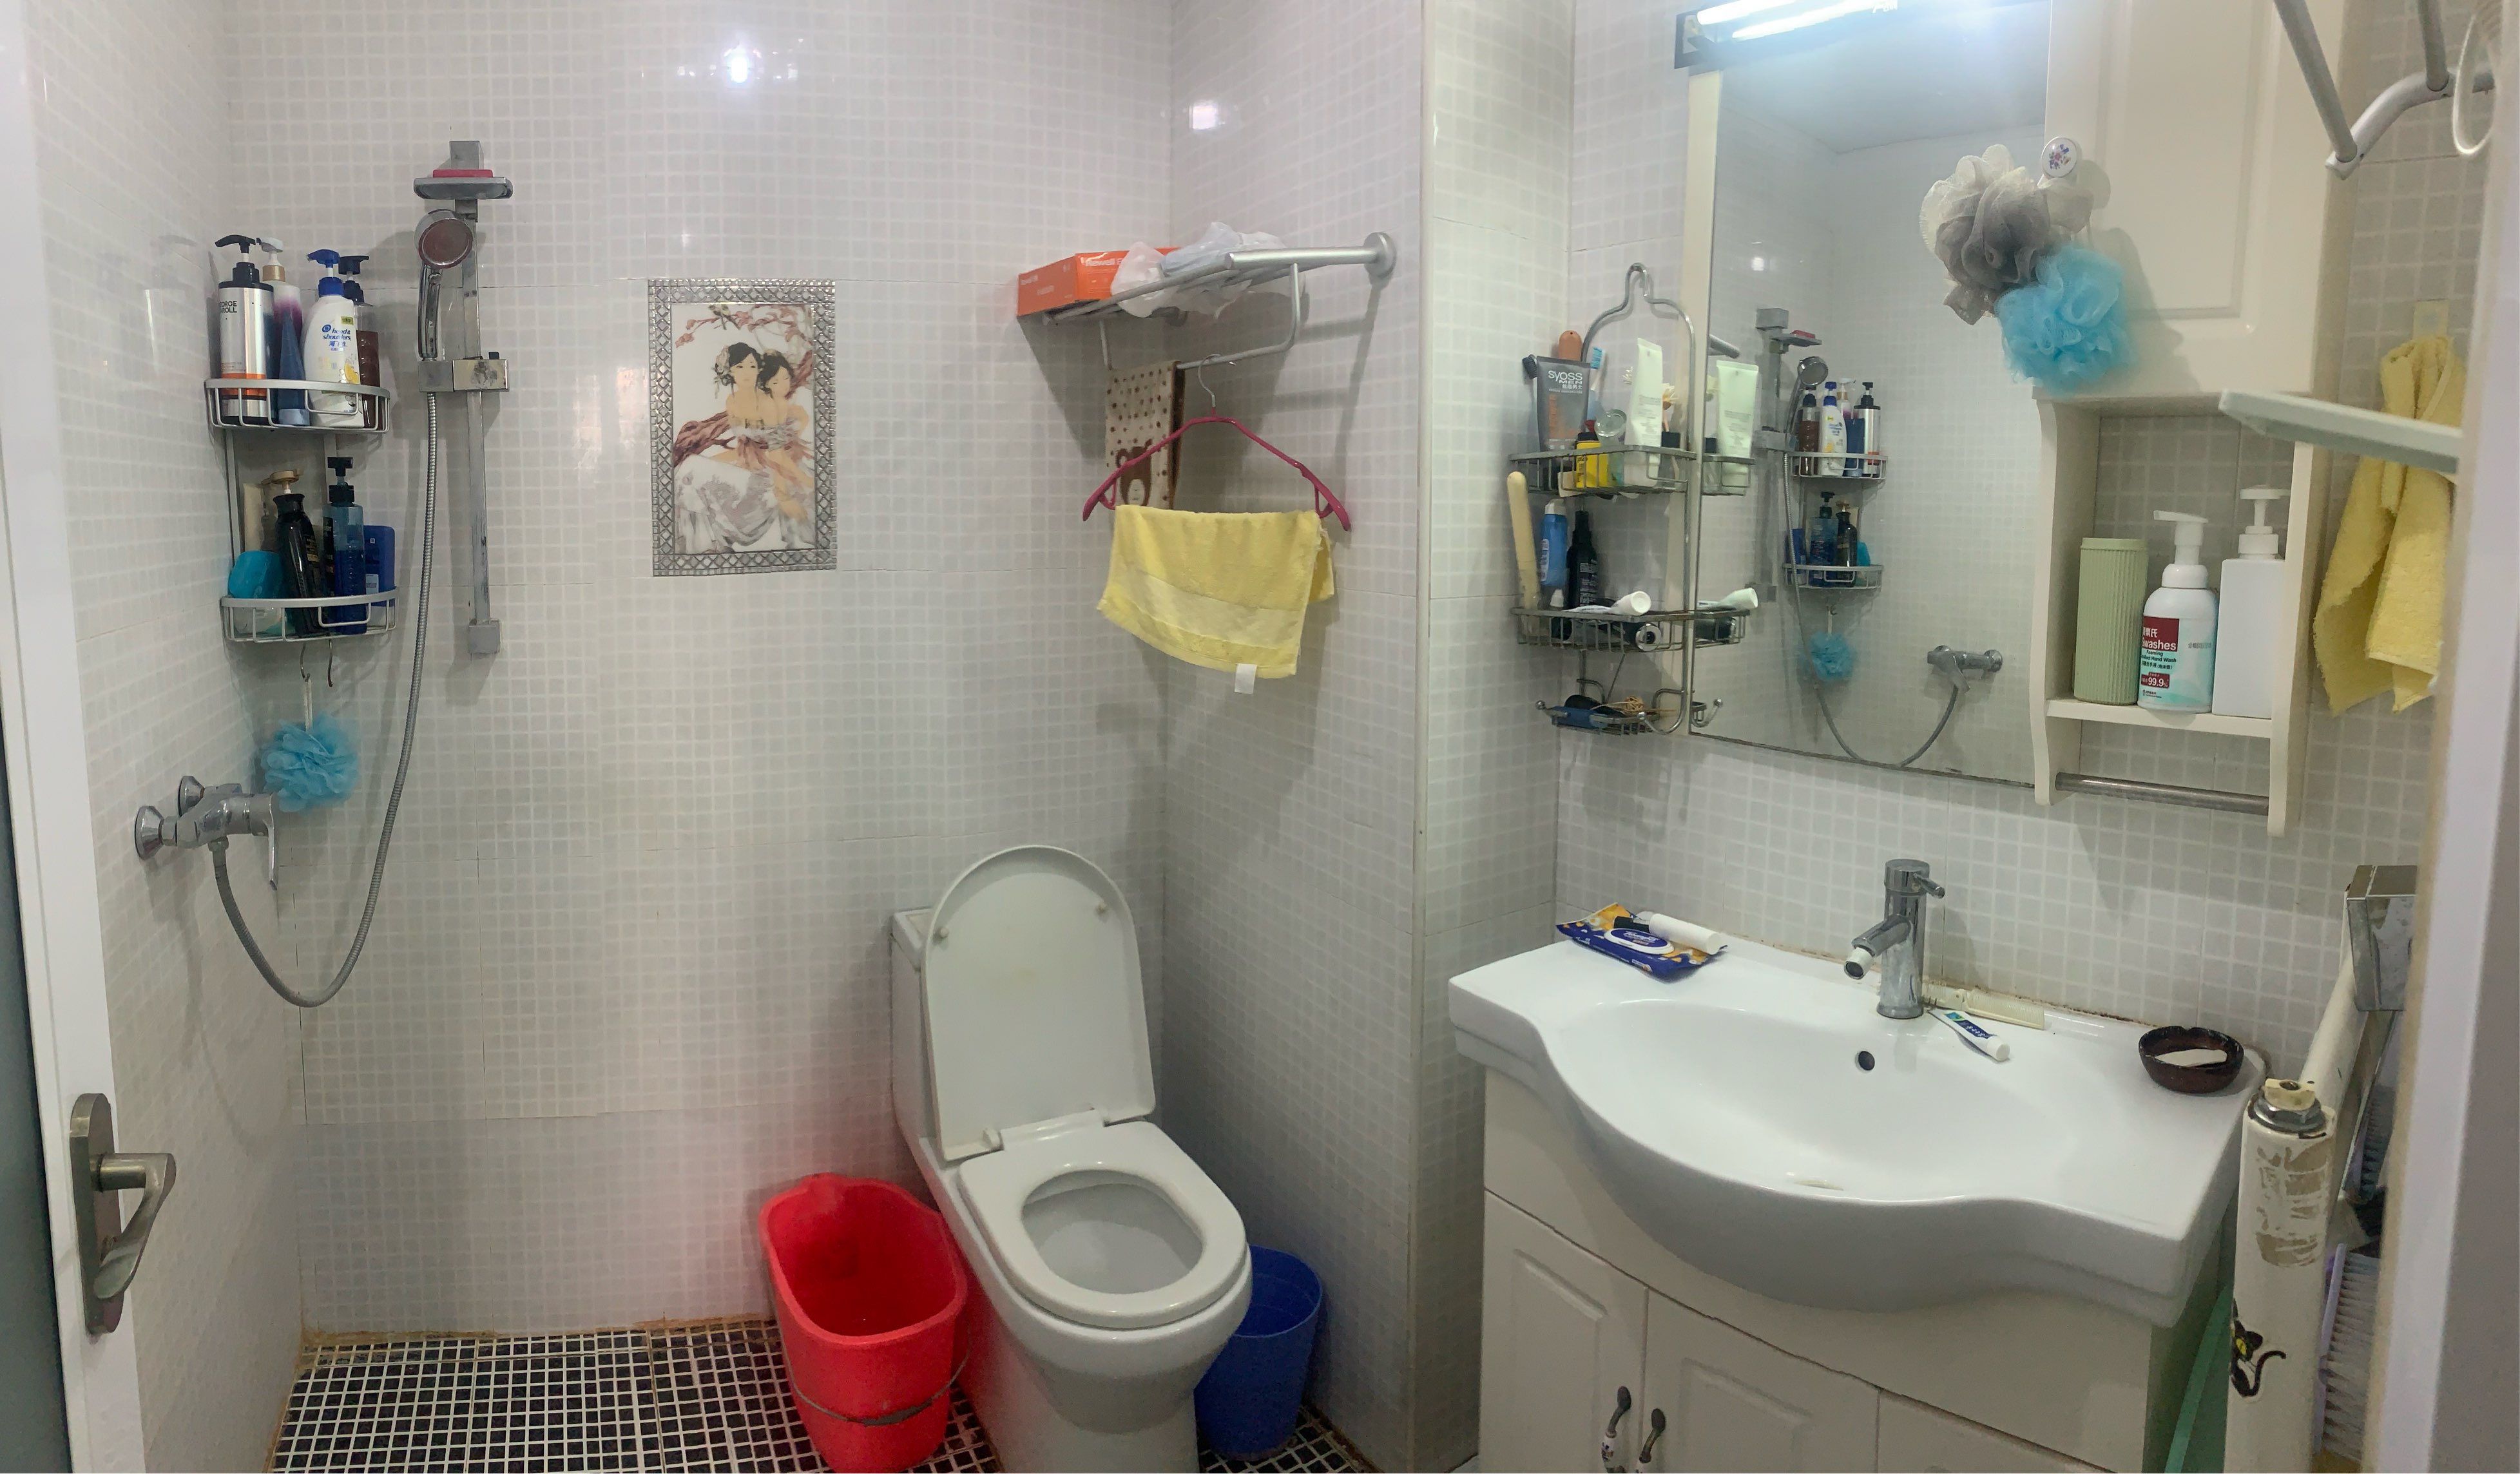 Beijing-Tongzhou-Cozy Home,Clean&Comfy,“Friends”,Chilled